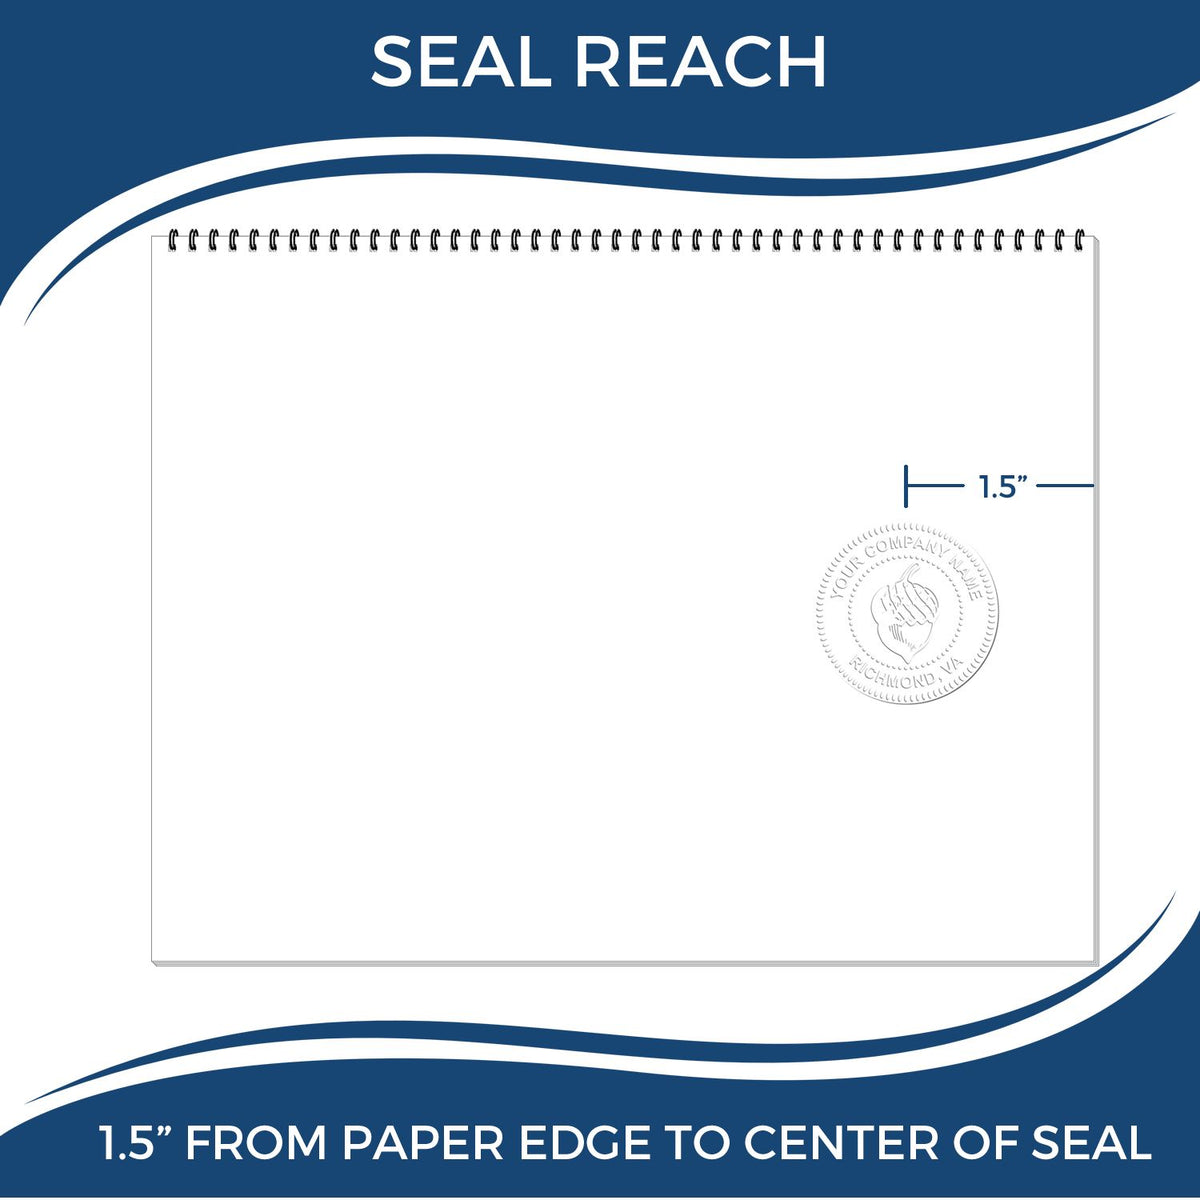 An infographic showing the seal reach which is represented by a ruler and a miniature seal image of the Hybrid Maryland Geologist Seal